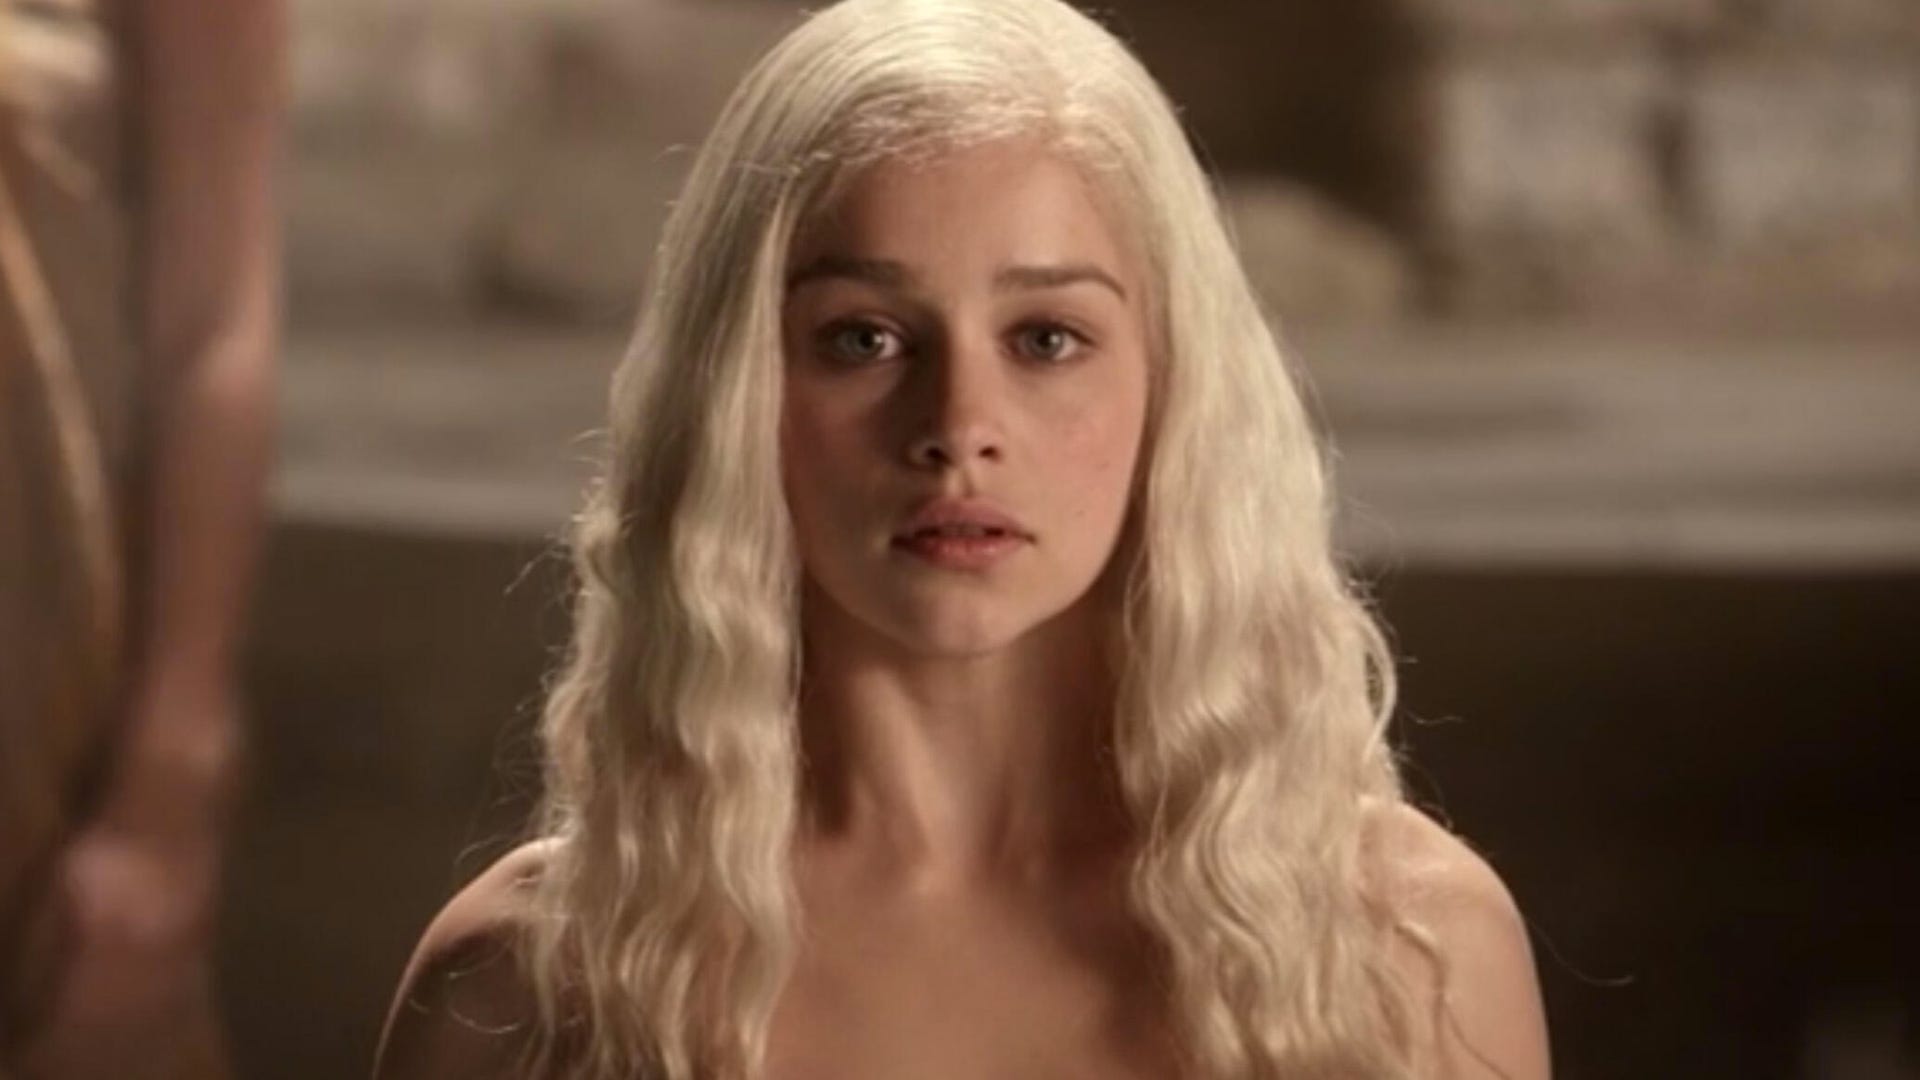 Game of thrones teen actress nude scene Game Of Thrones Emilia Clarke Says She Was Pressured Into Doing Nude Scenes Tv Guide